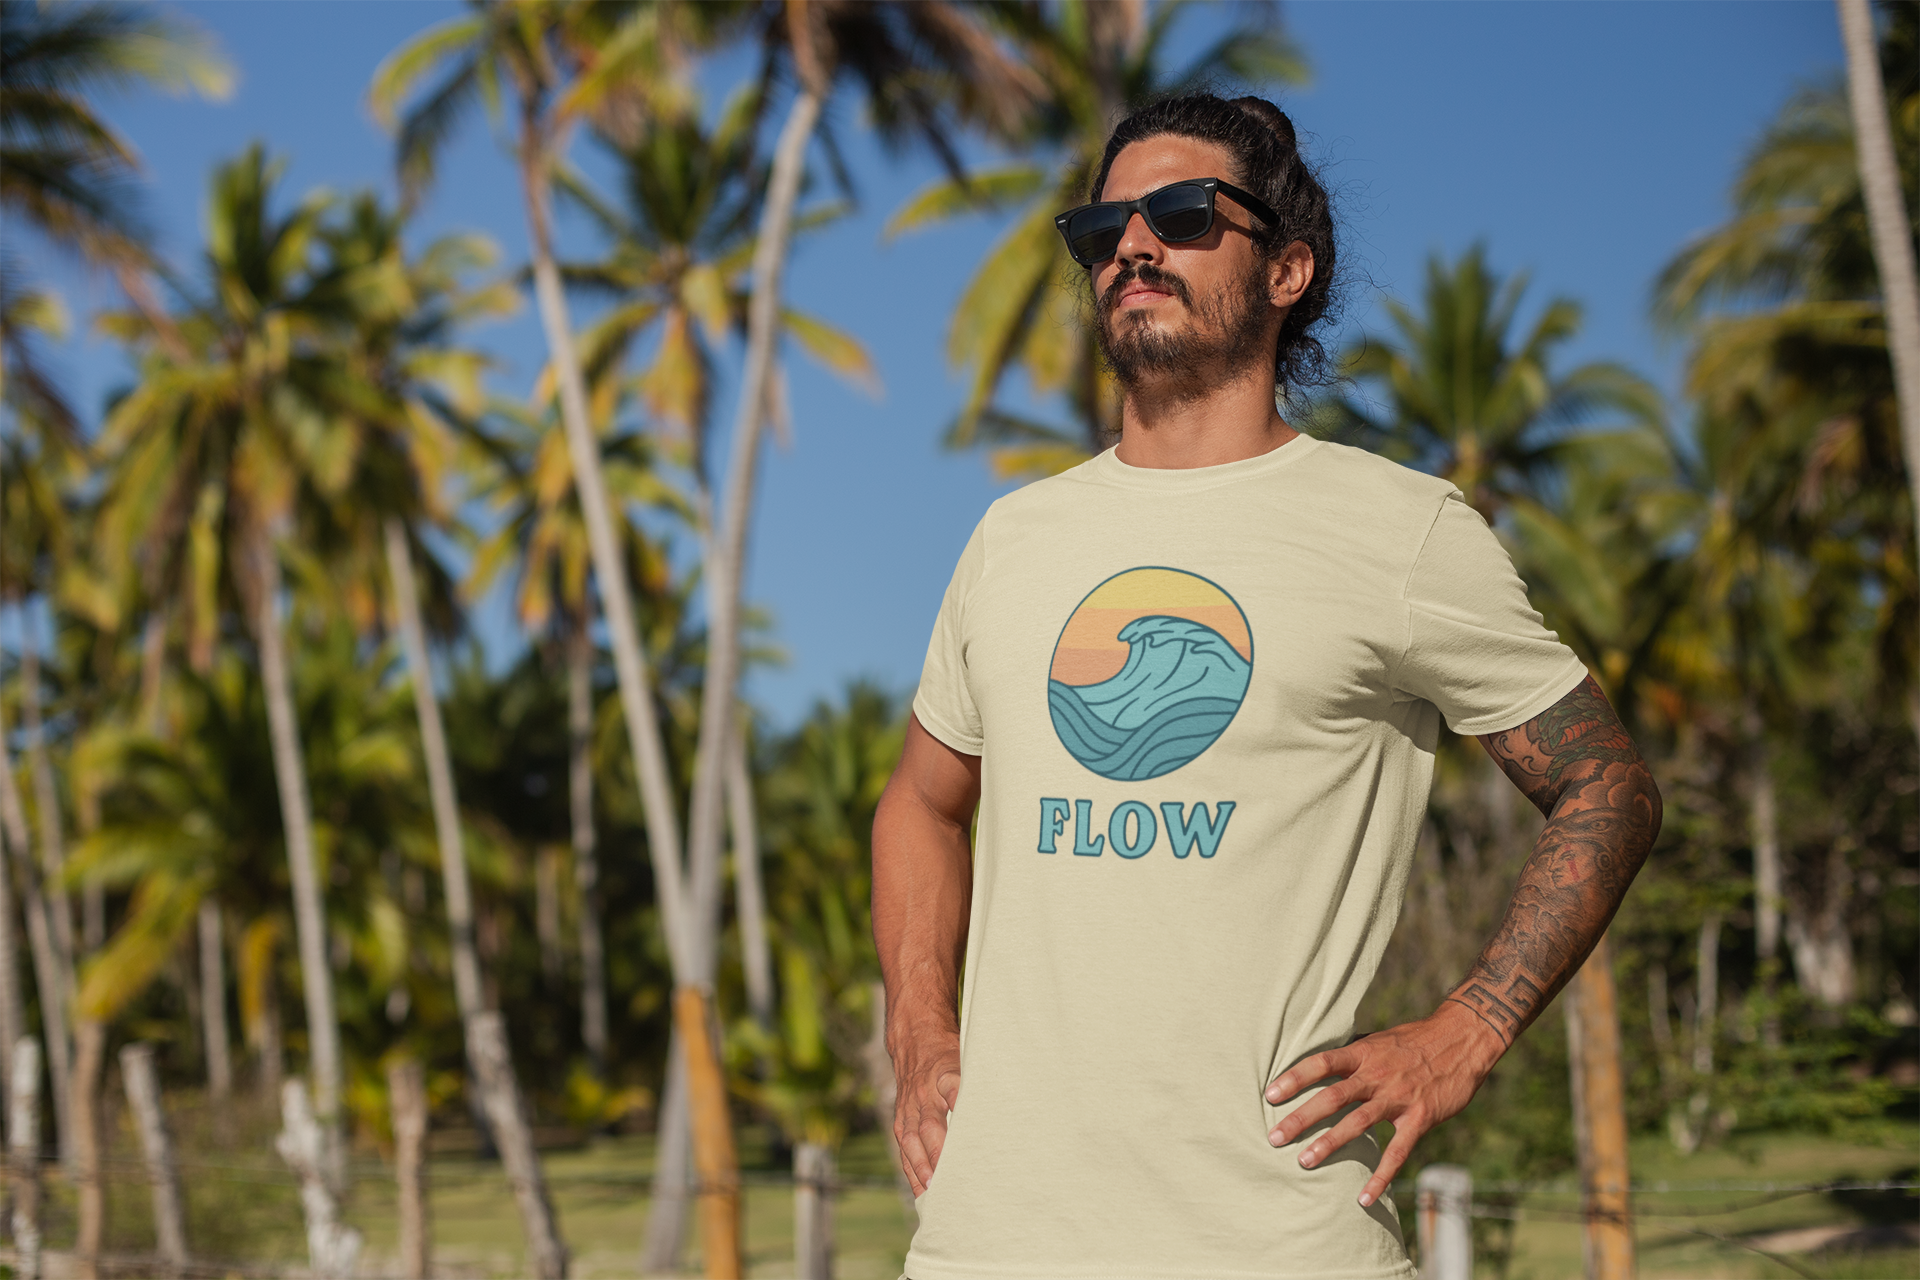 cool man in sunglasses wearing a cream tshirt with flow design, standing in nature looking into the distance